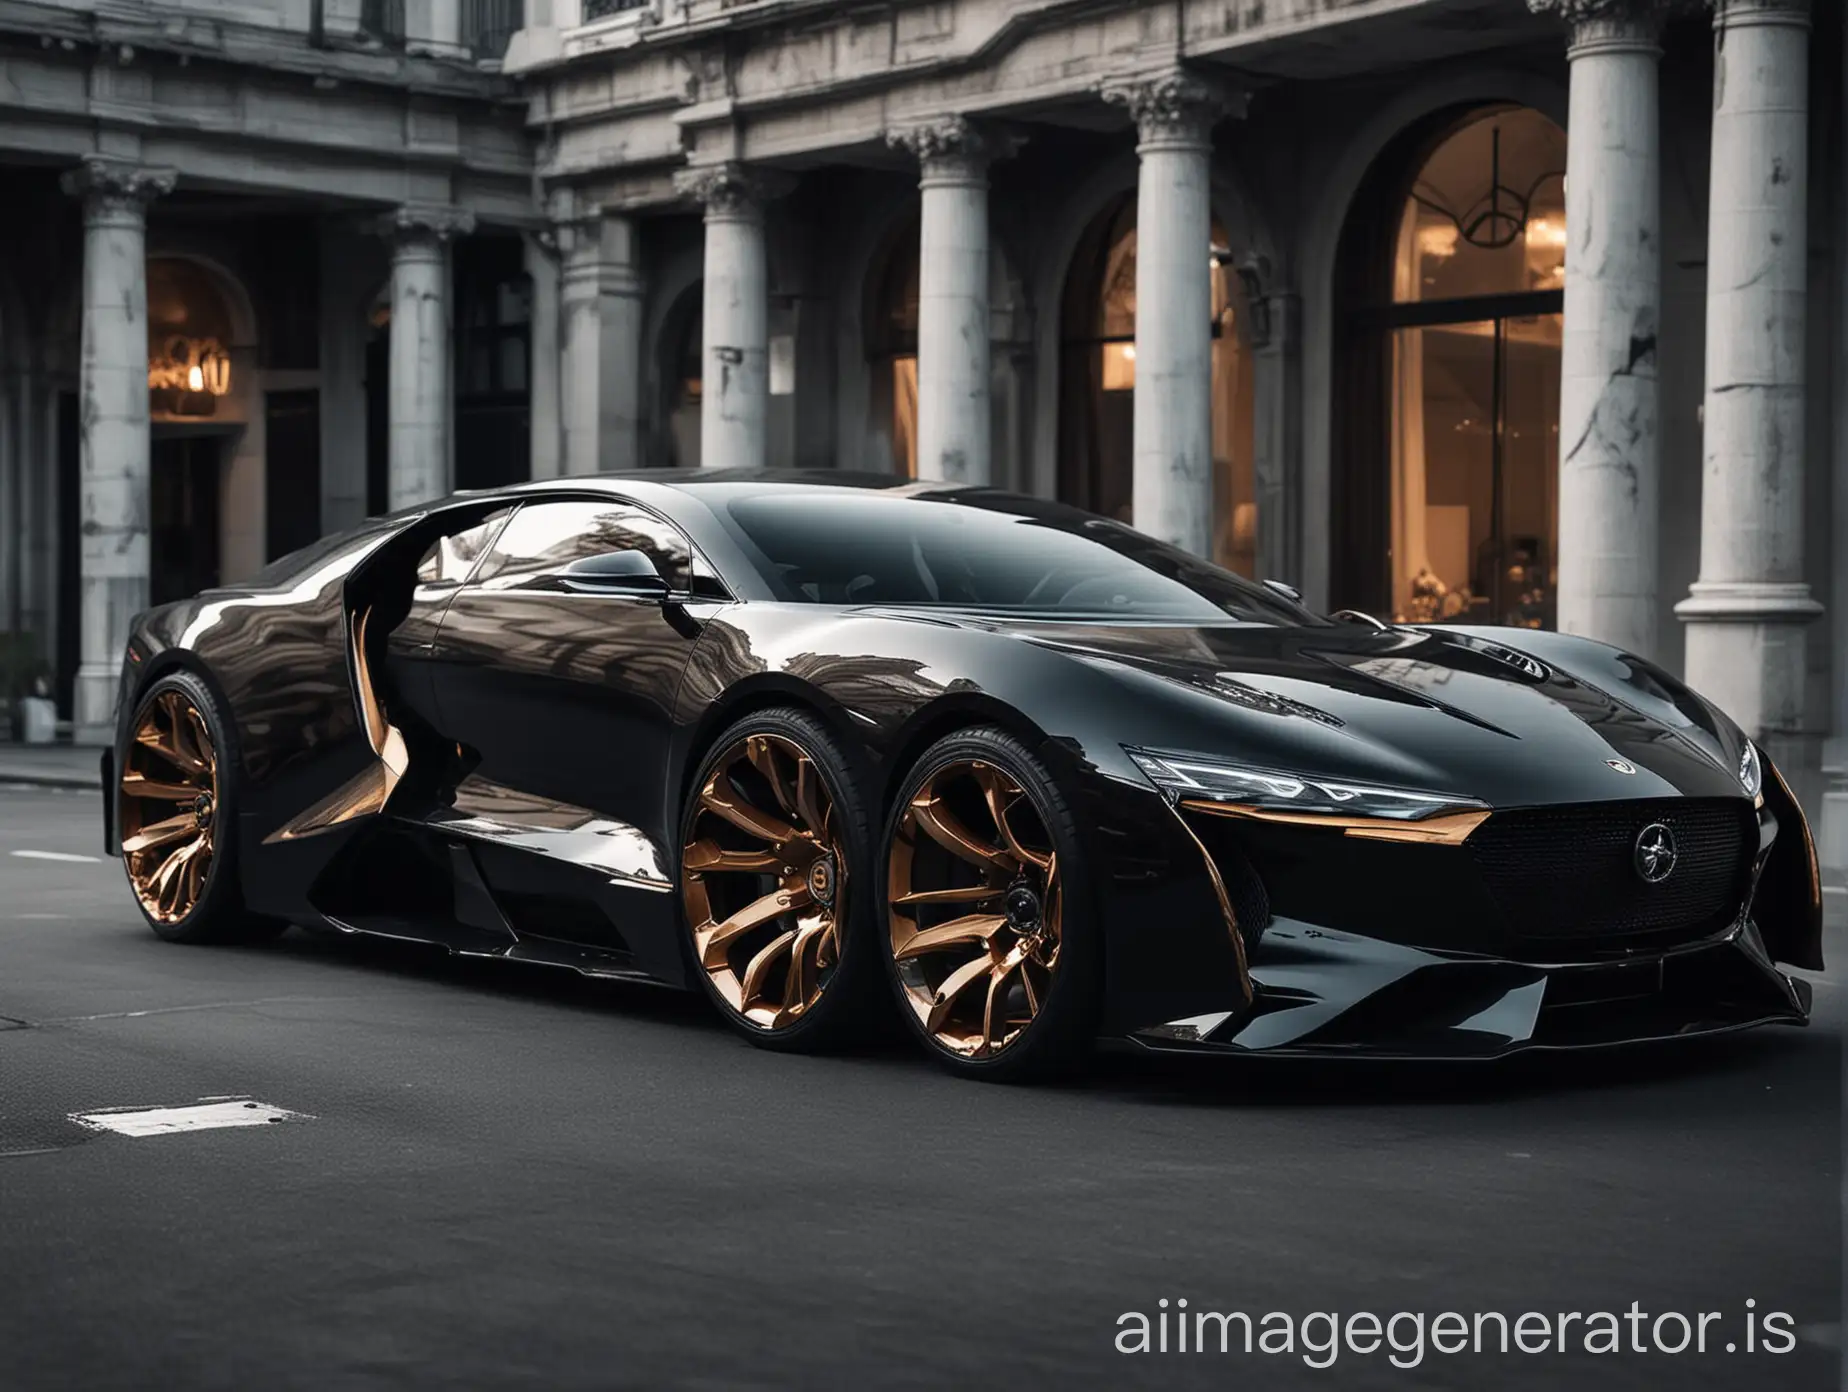 an extreme luxury car in future. from Infront aspect. The car should be black